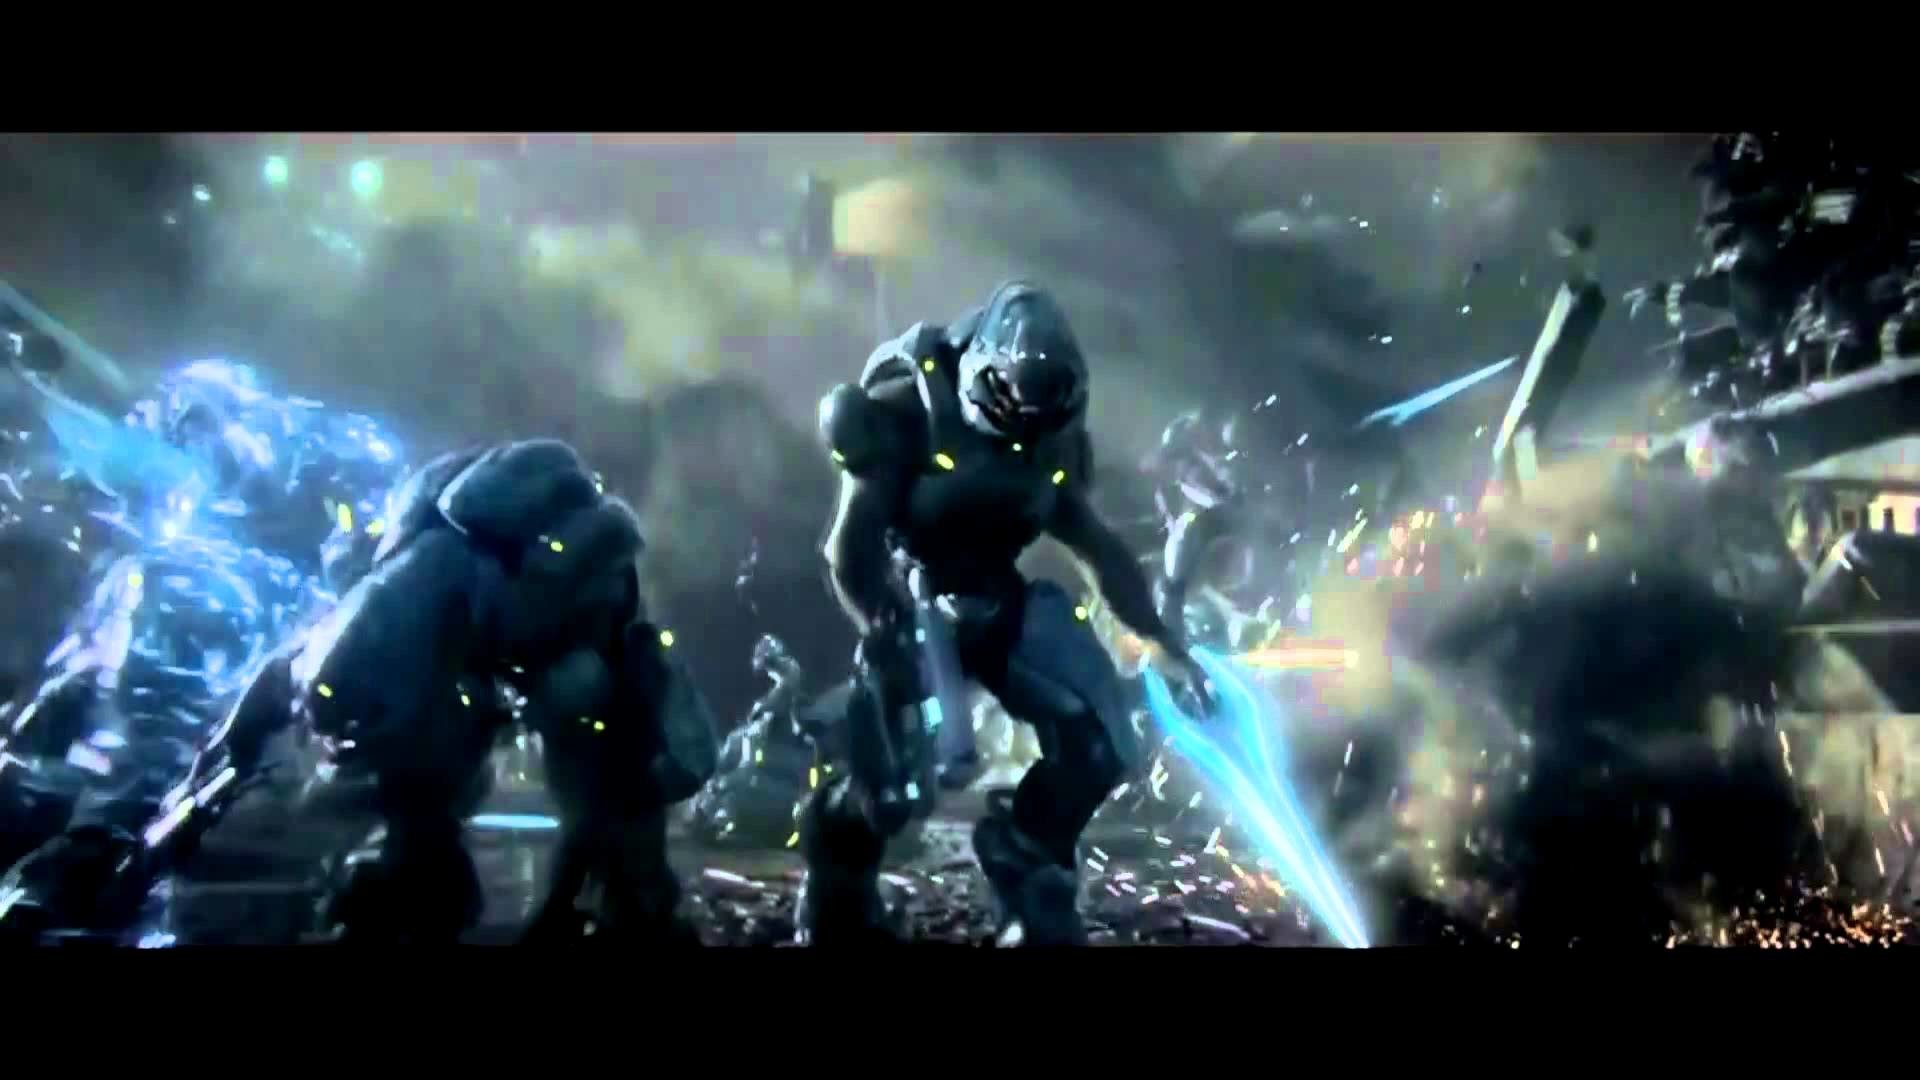 1920x1080 Displaying 19> Images For - Halo 4 Multiplayer Wallpaper 1080p.